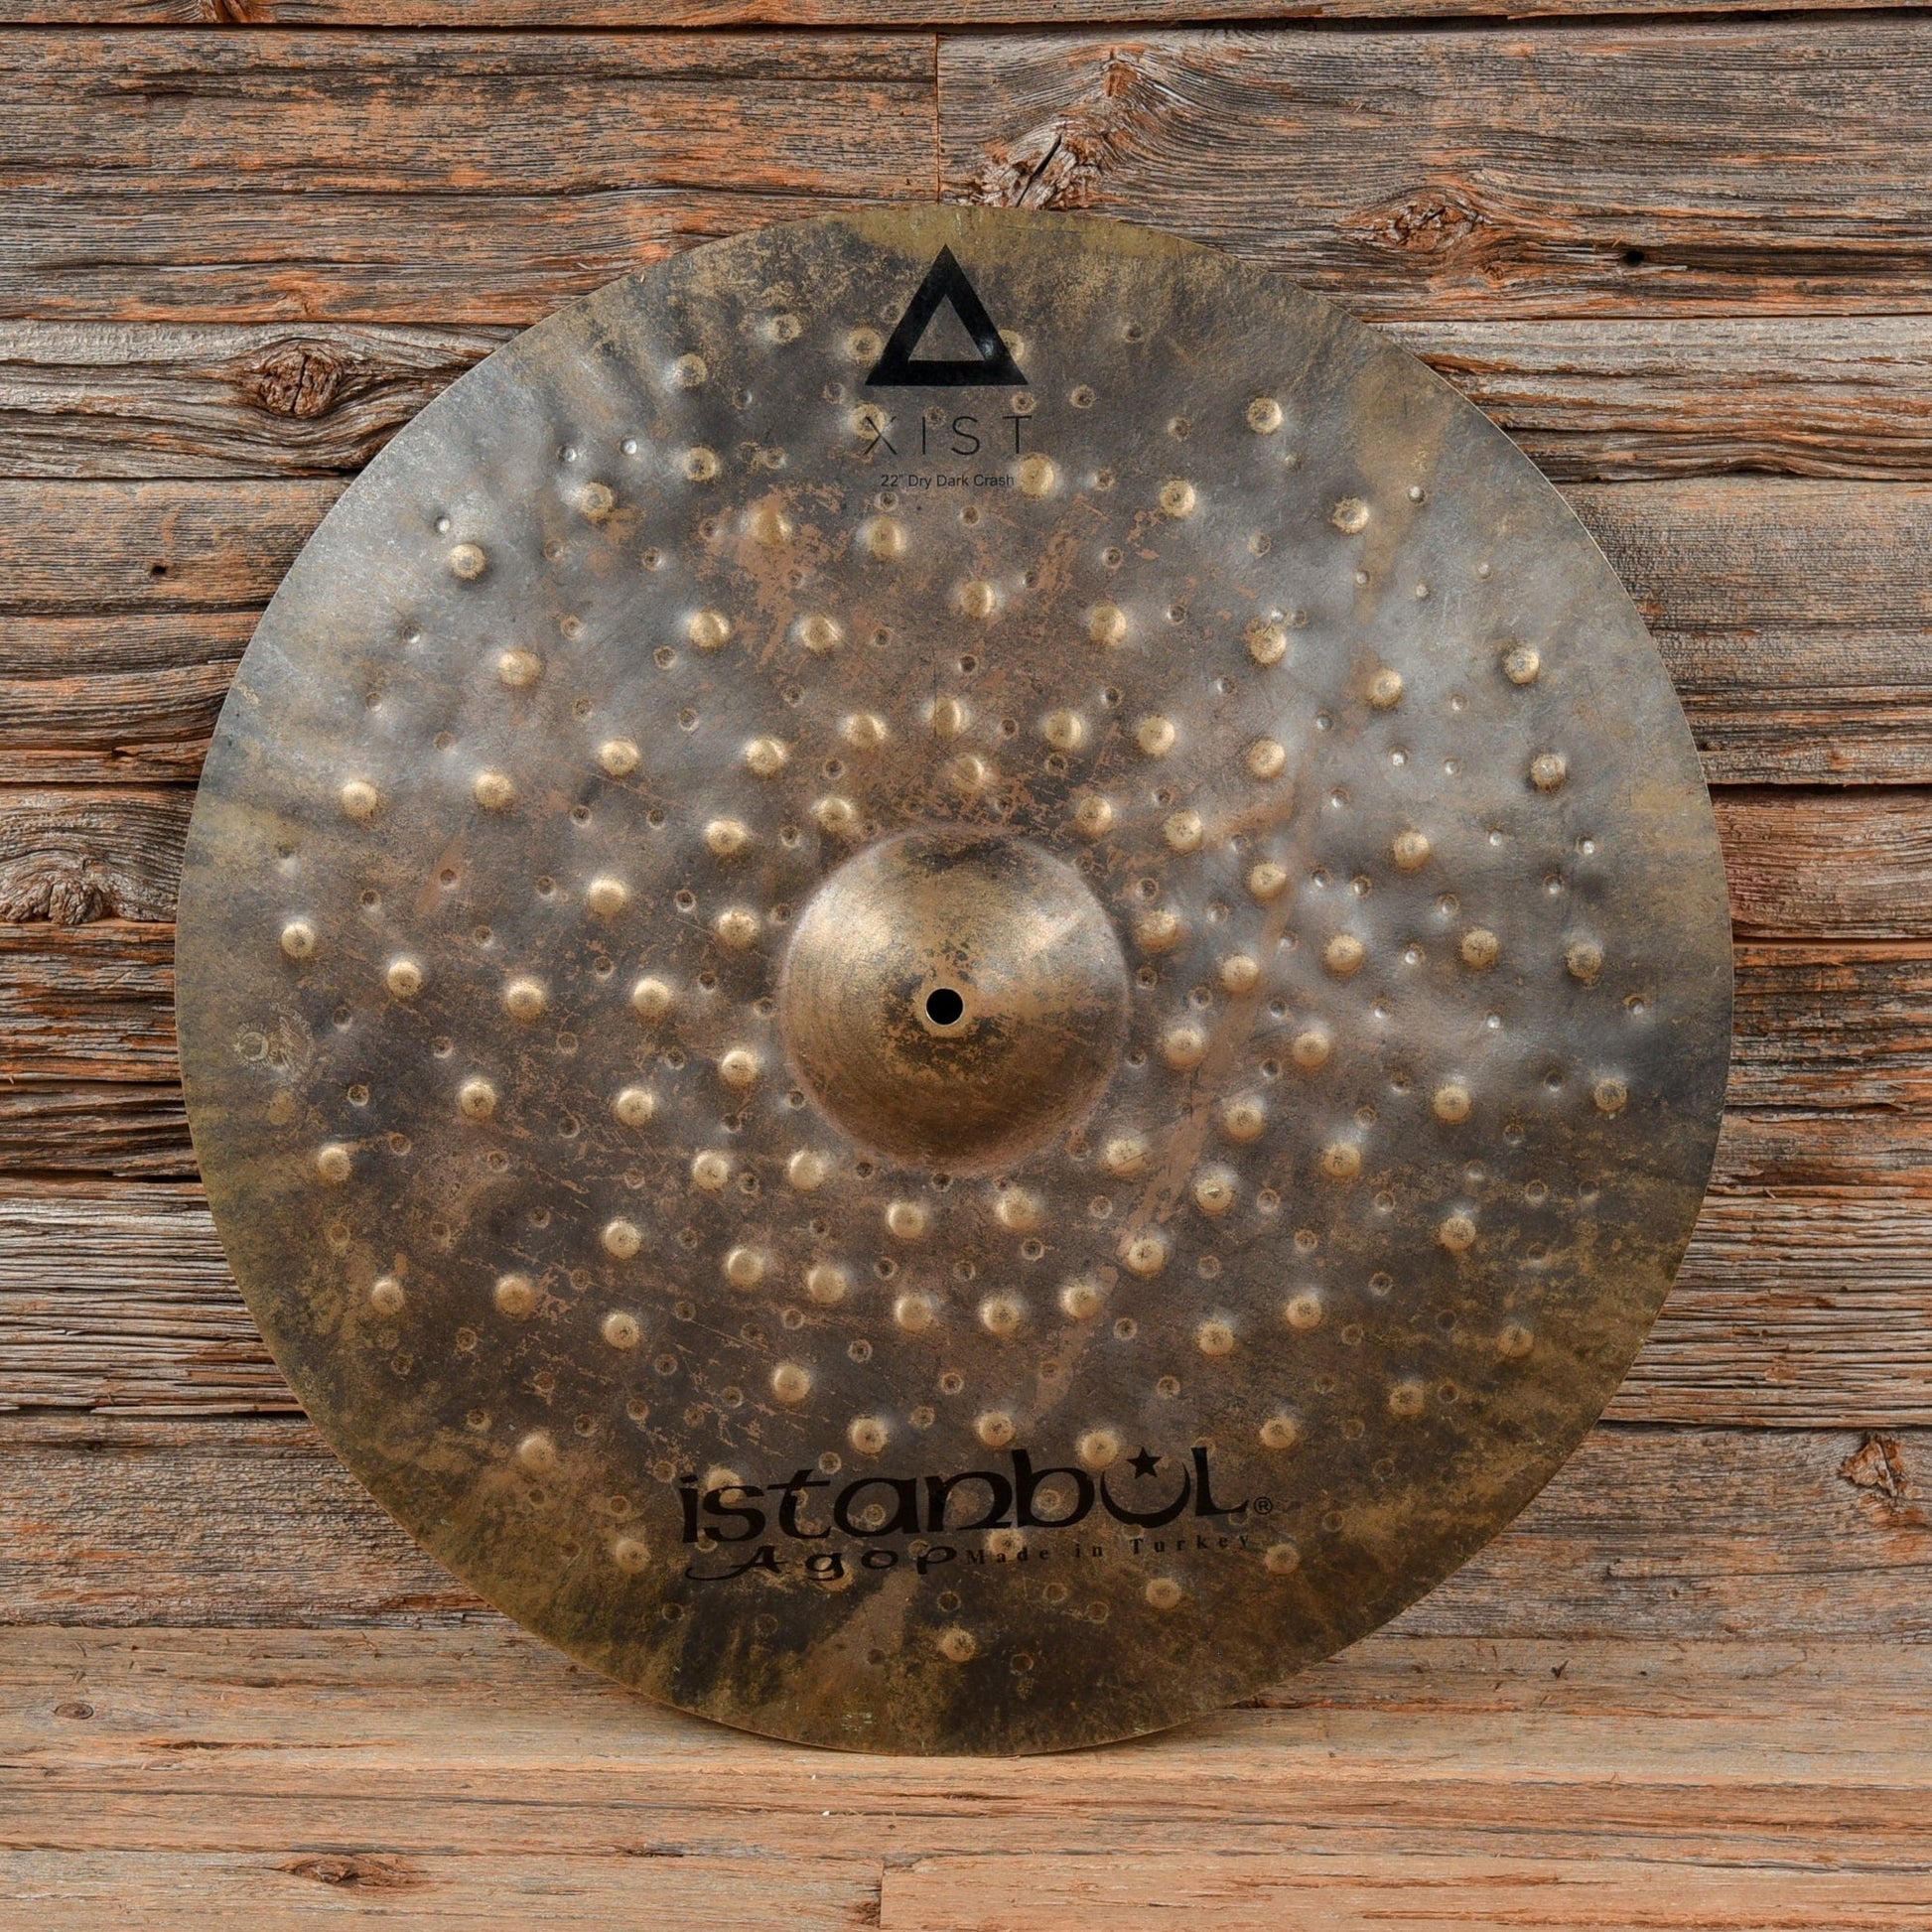 Istanbul Agop Agop 22" Xist Dry Dark Crash Cymbal USED Drums and Percussion